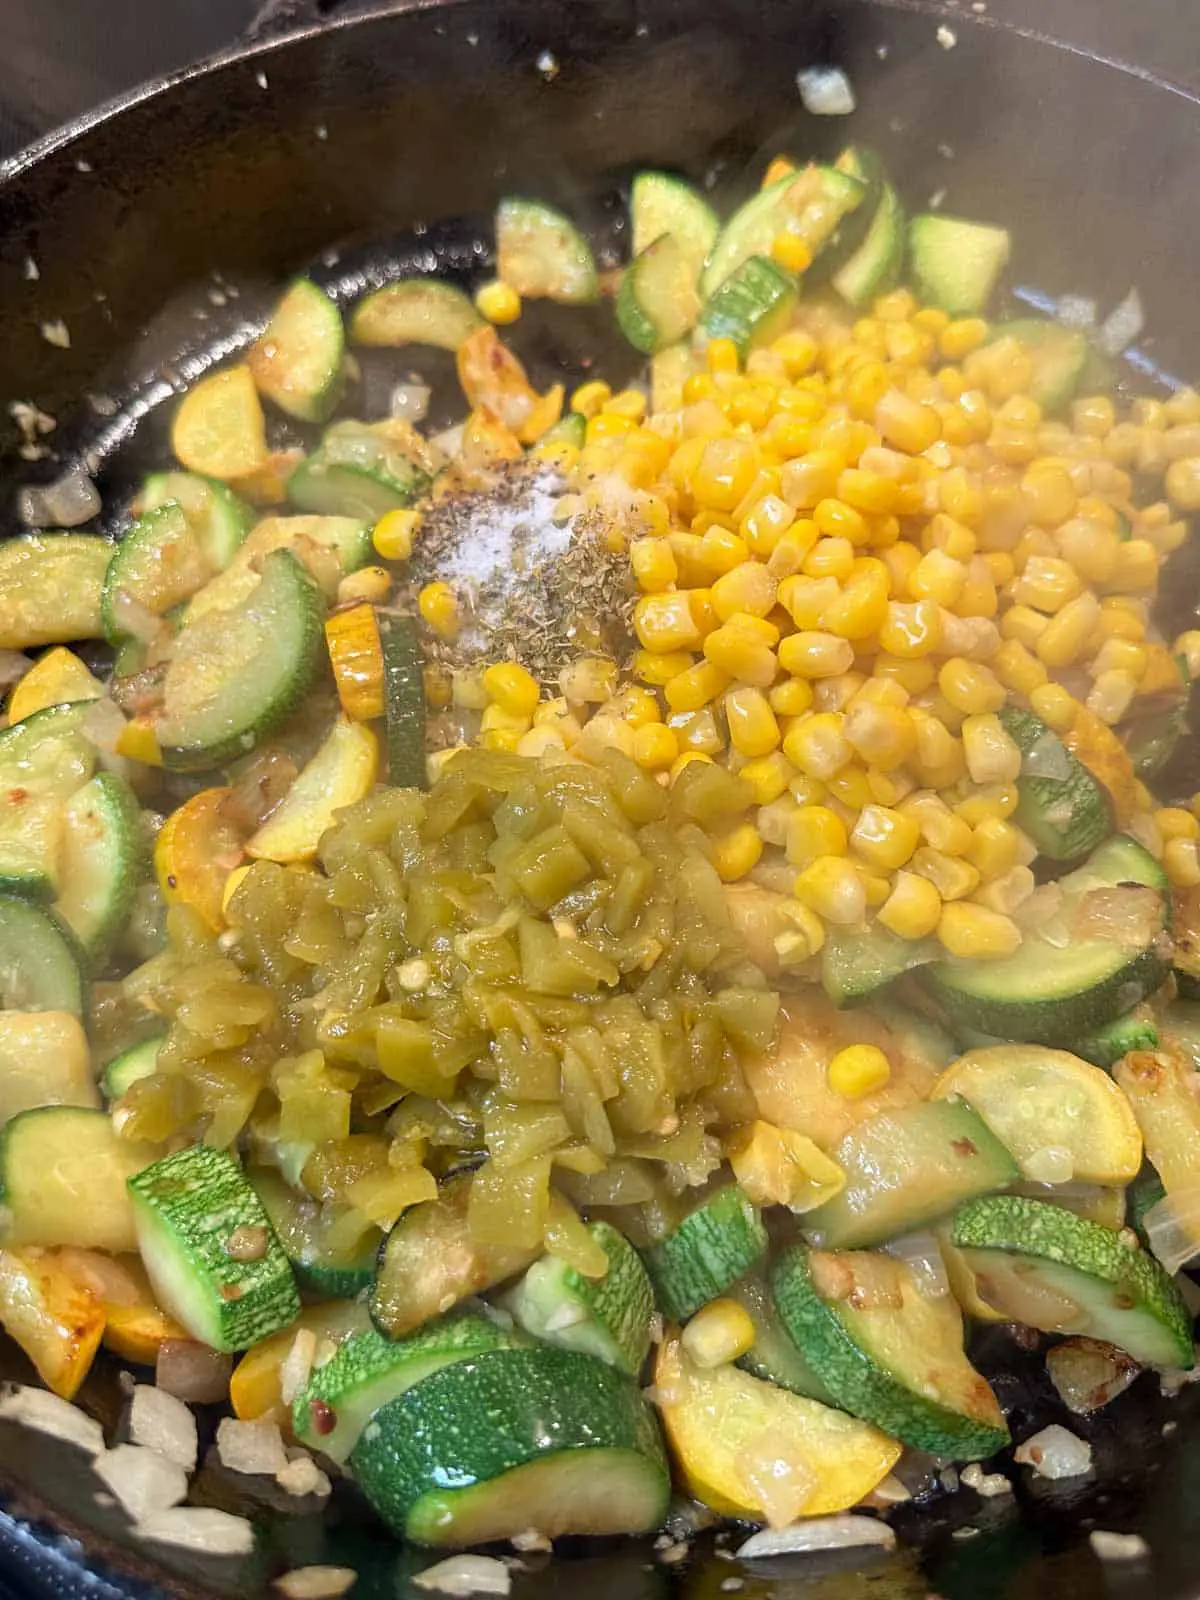 Sliced squash and chopped onion in a cast iron pan topped with green chilies, seasonings, and corn.